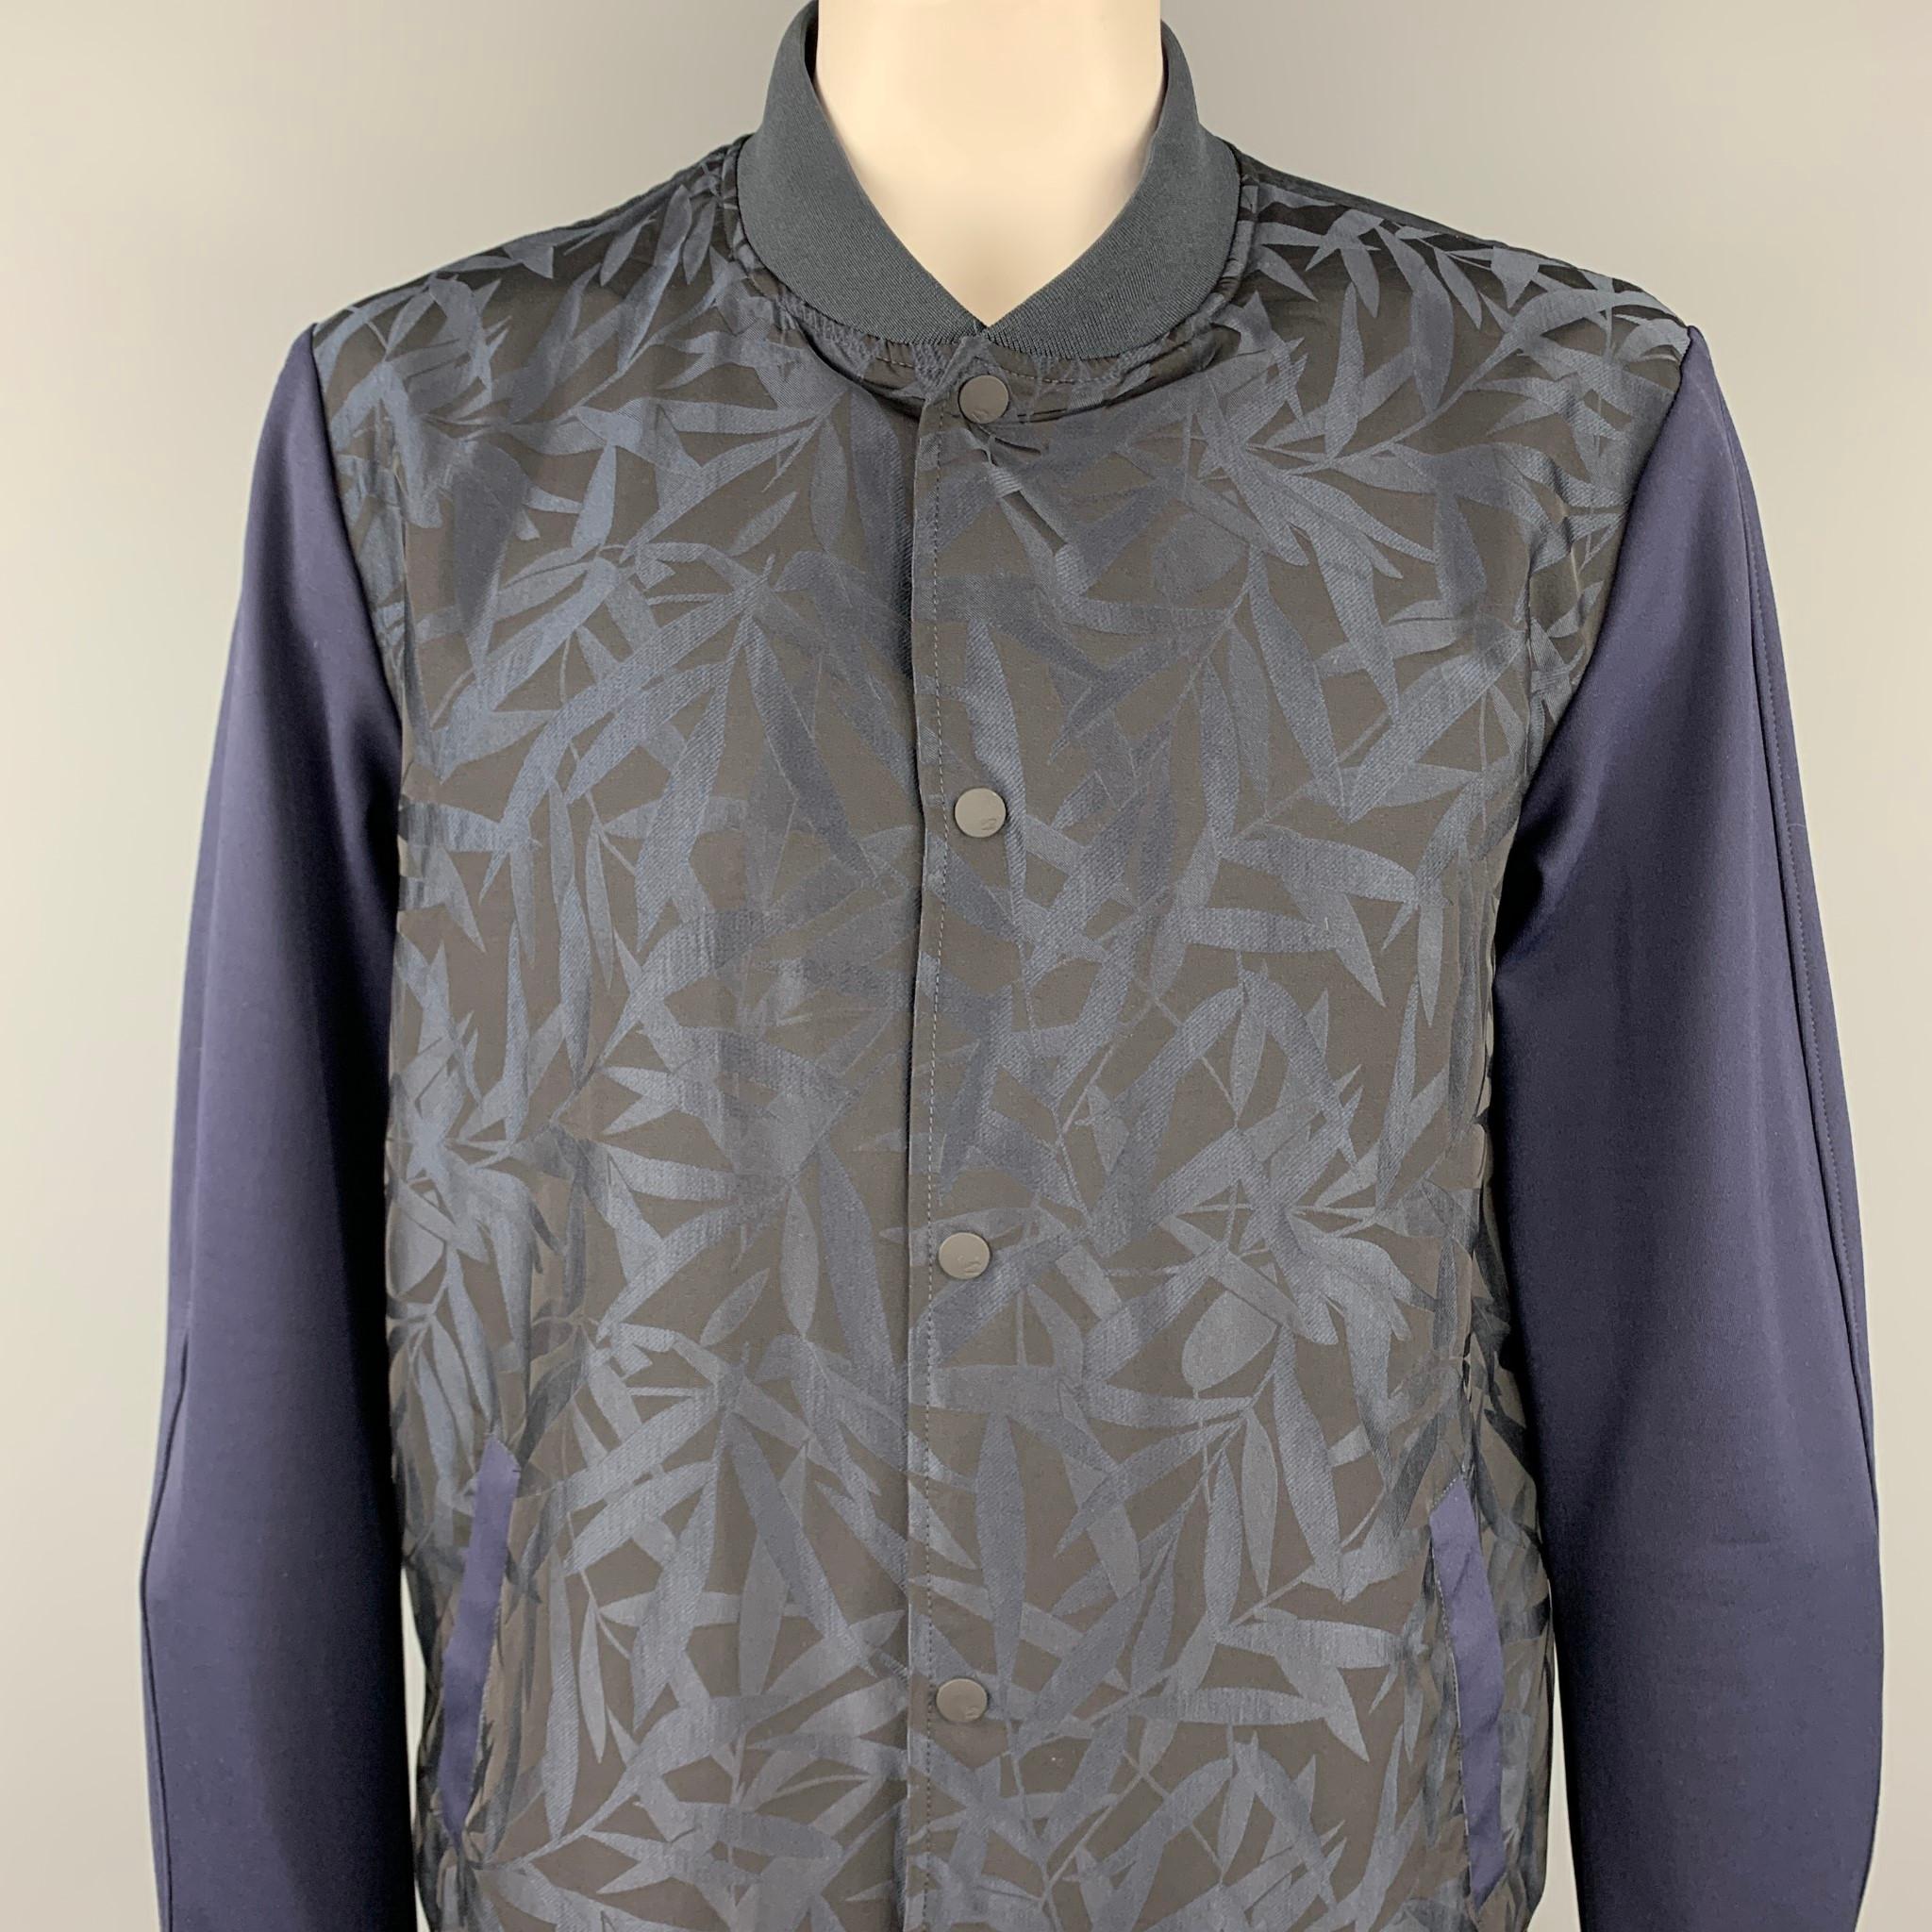 SCOTCH AND SODA jacket comes in a navy jacquard polyester featuring a bomber style, slit pockets, and a snap button closure. 

New With Tags.
Marked: XXL

Measurements:

Shoulder: 20 in.
Chest: 45 in.
Sleeve: 29 in.
Length: 29.5 in. 